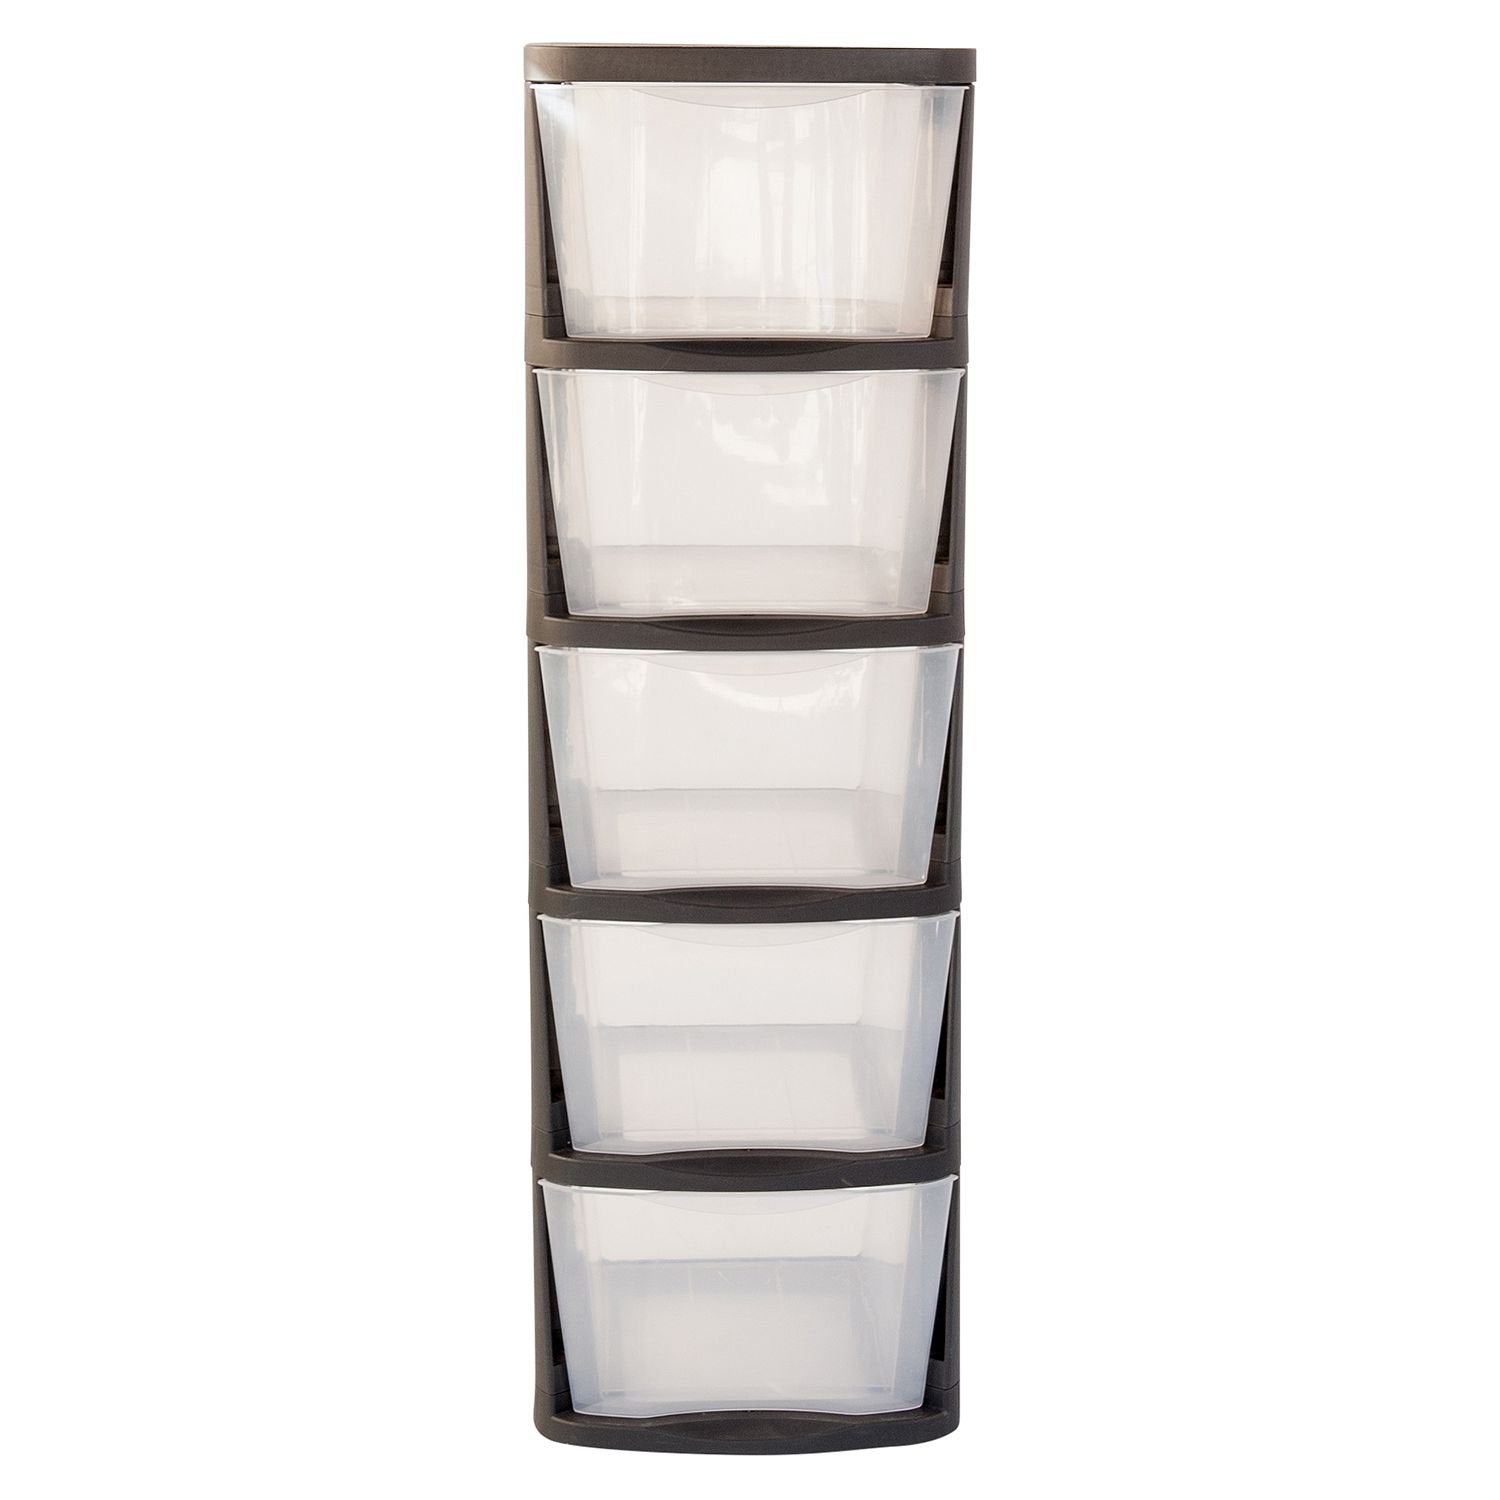 Product of Muscle Rack 5-Drawer Clear Plastic Storage Tower with Black Frame - Drawers & Cabinet Organizers [Bulk Savings]